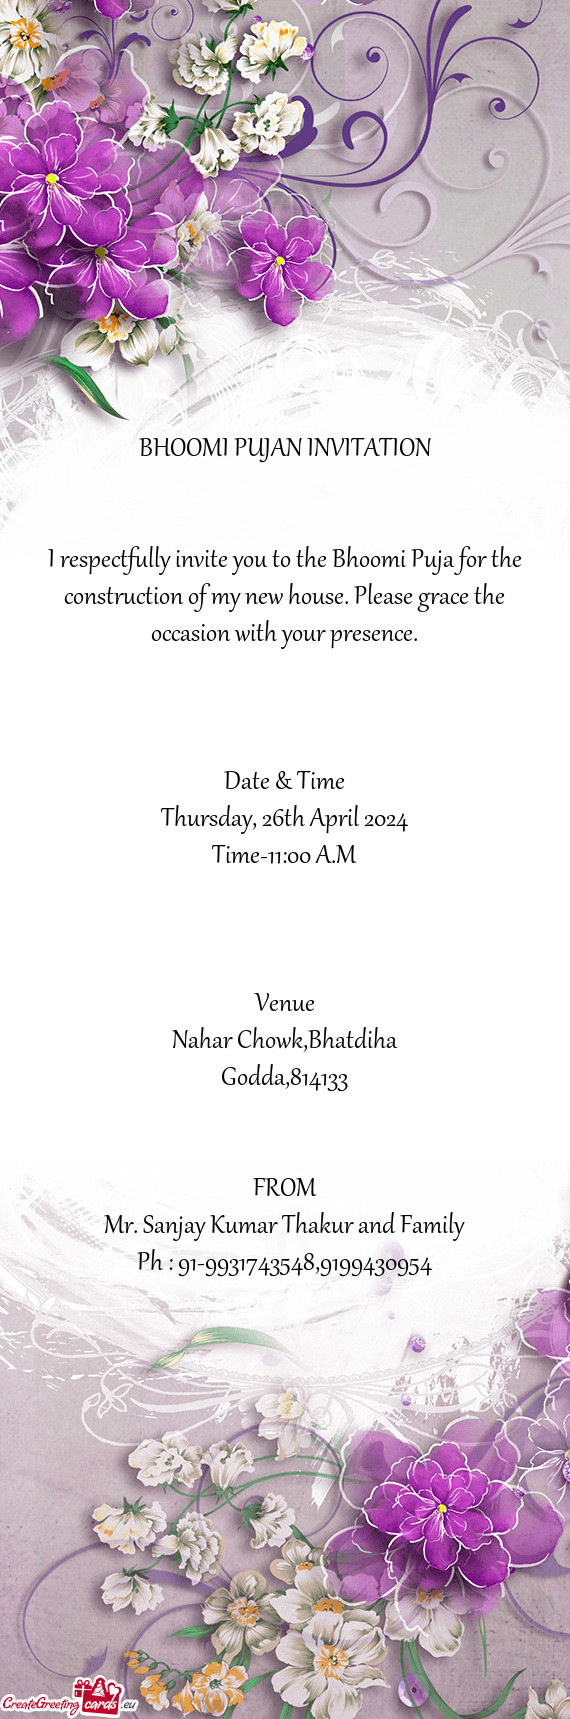 I respectfully invite you to the Bhoomi Puja for the construction of my new house. Please grace the